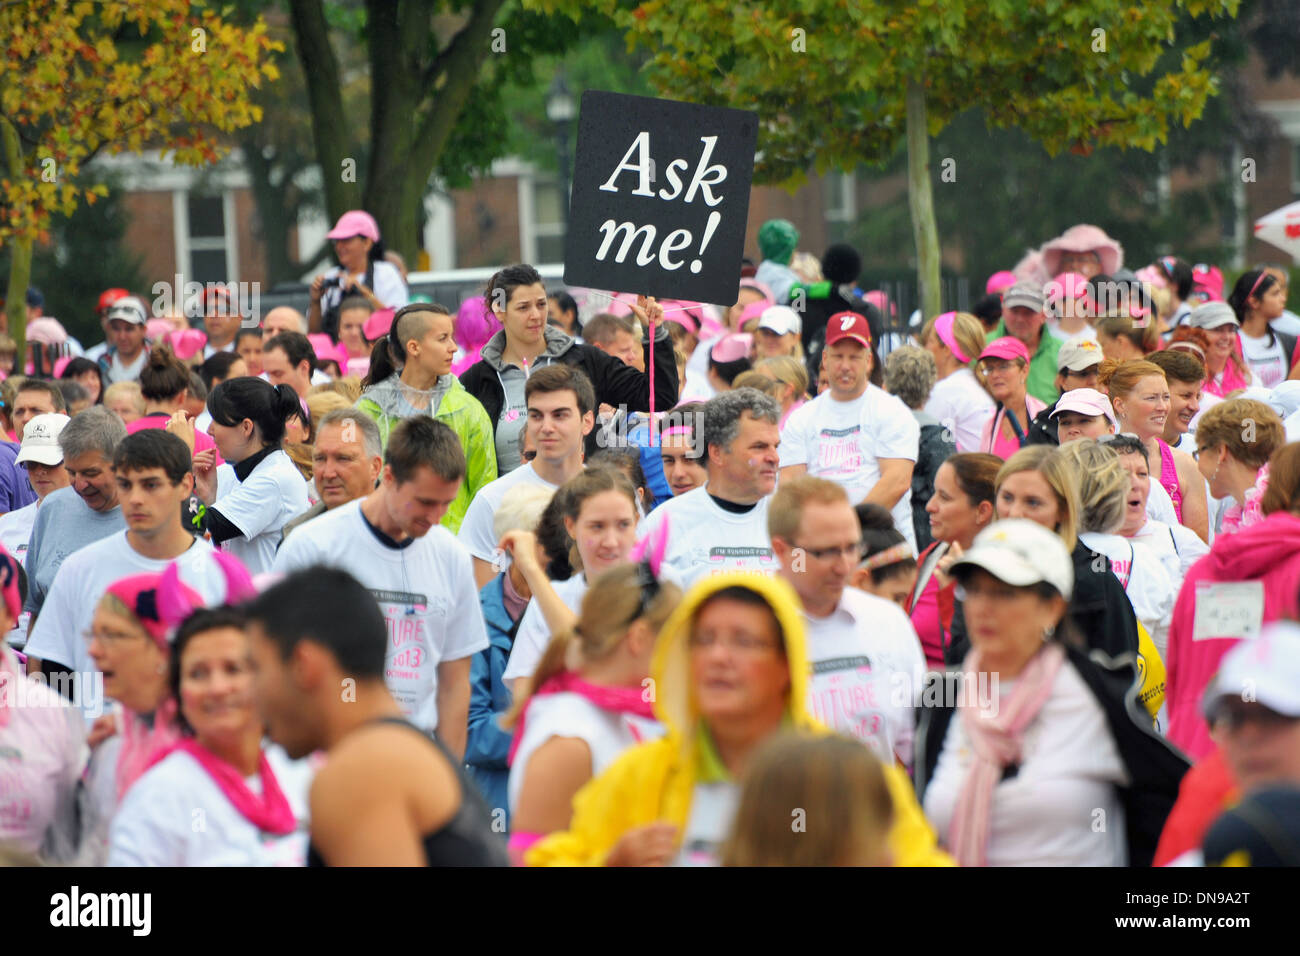 A large crowd of people at a charity event in Canada. Stock Photo